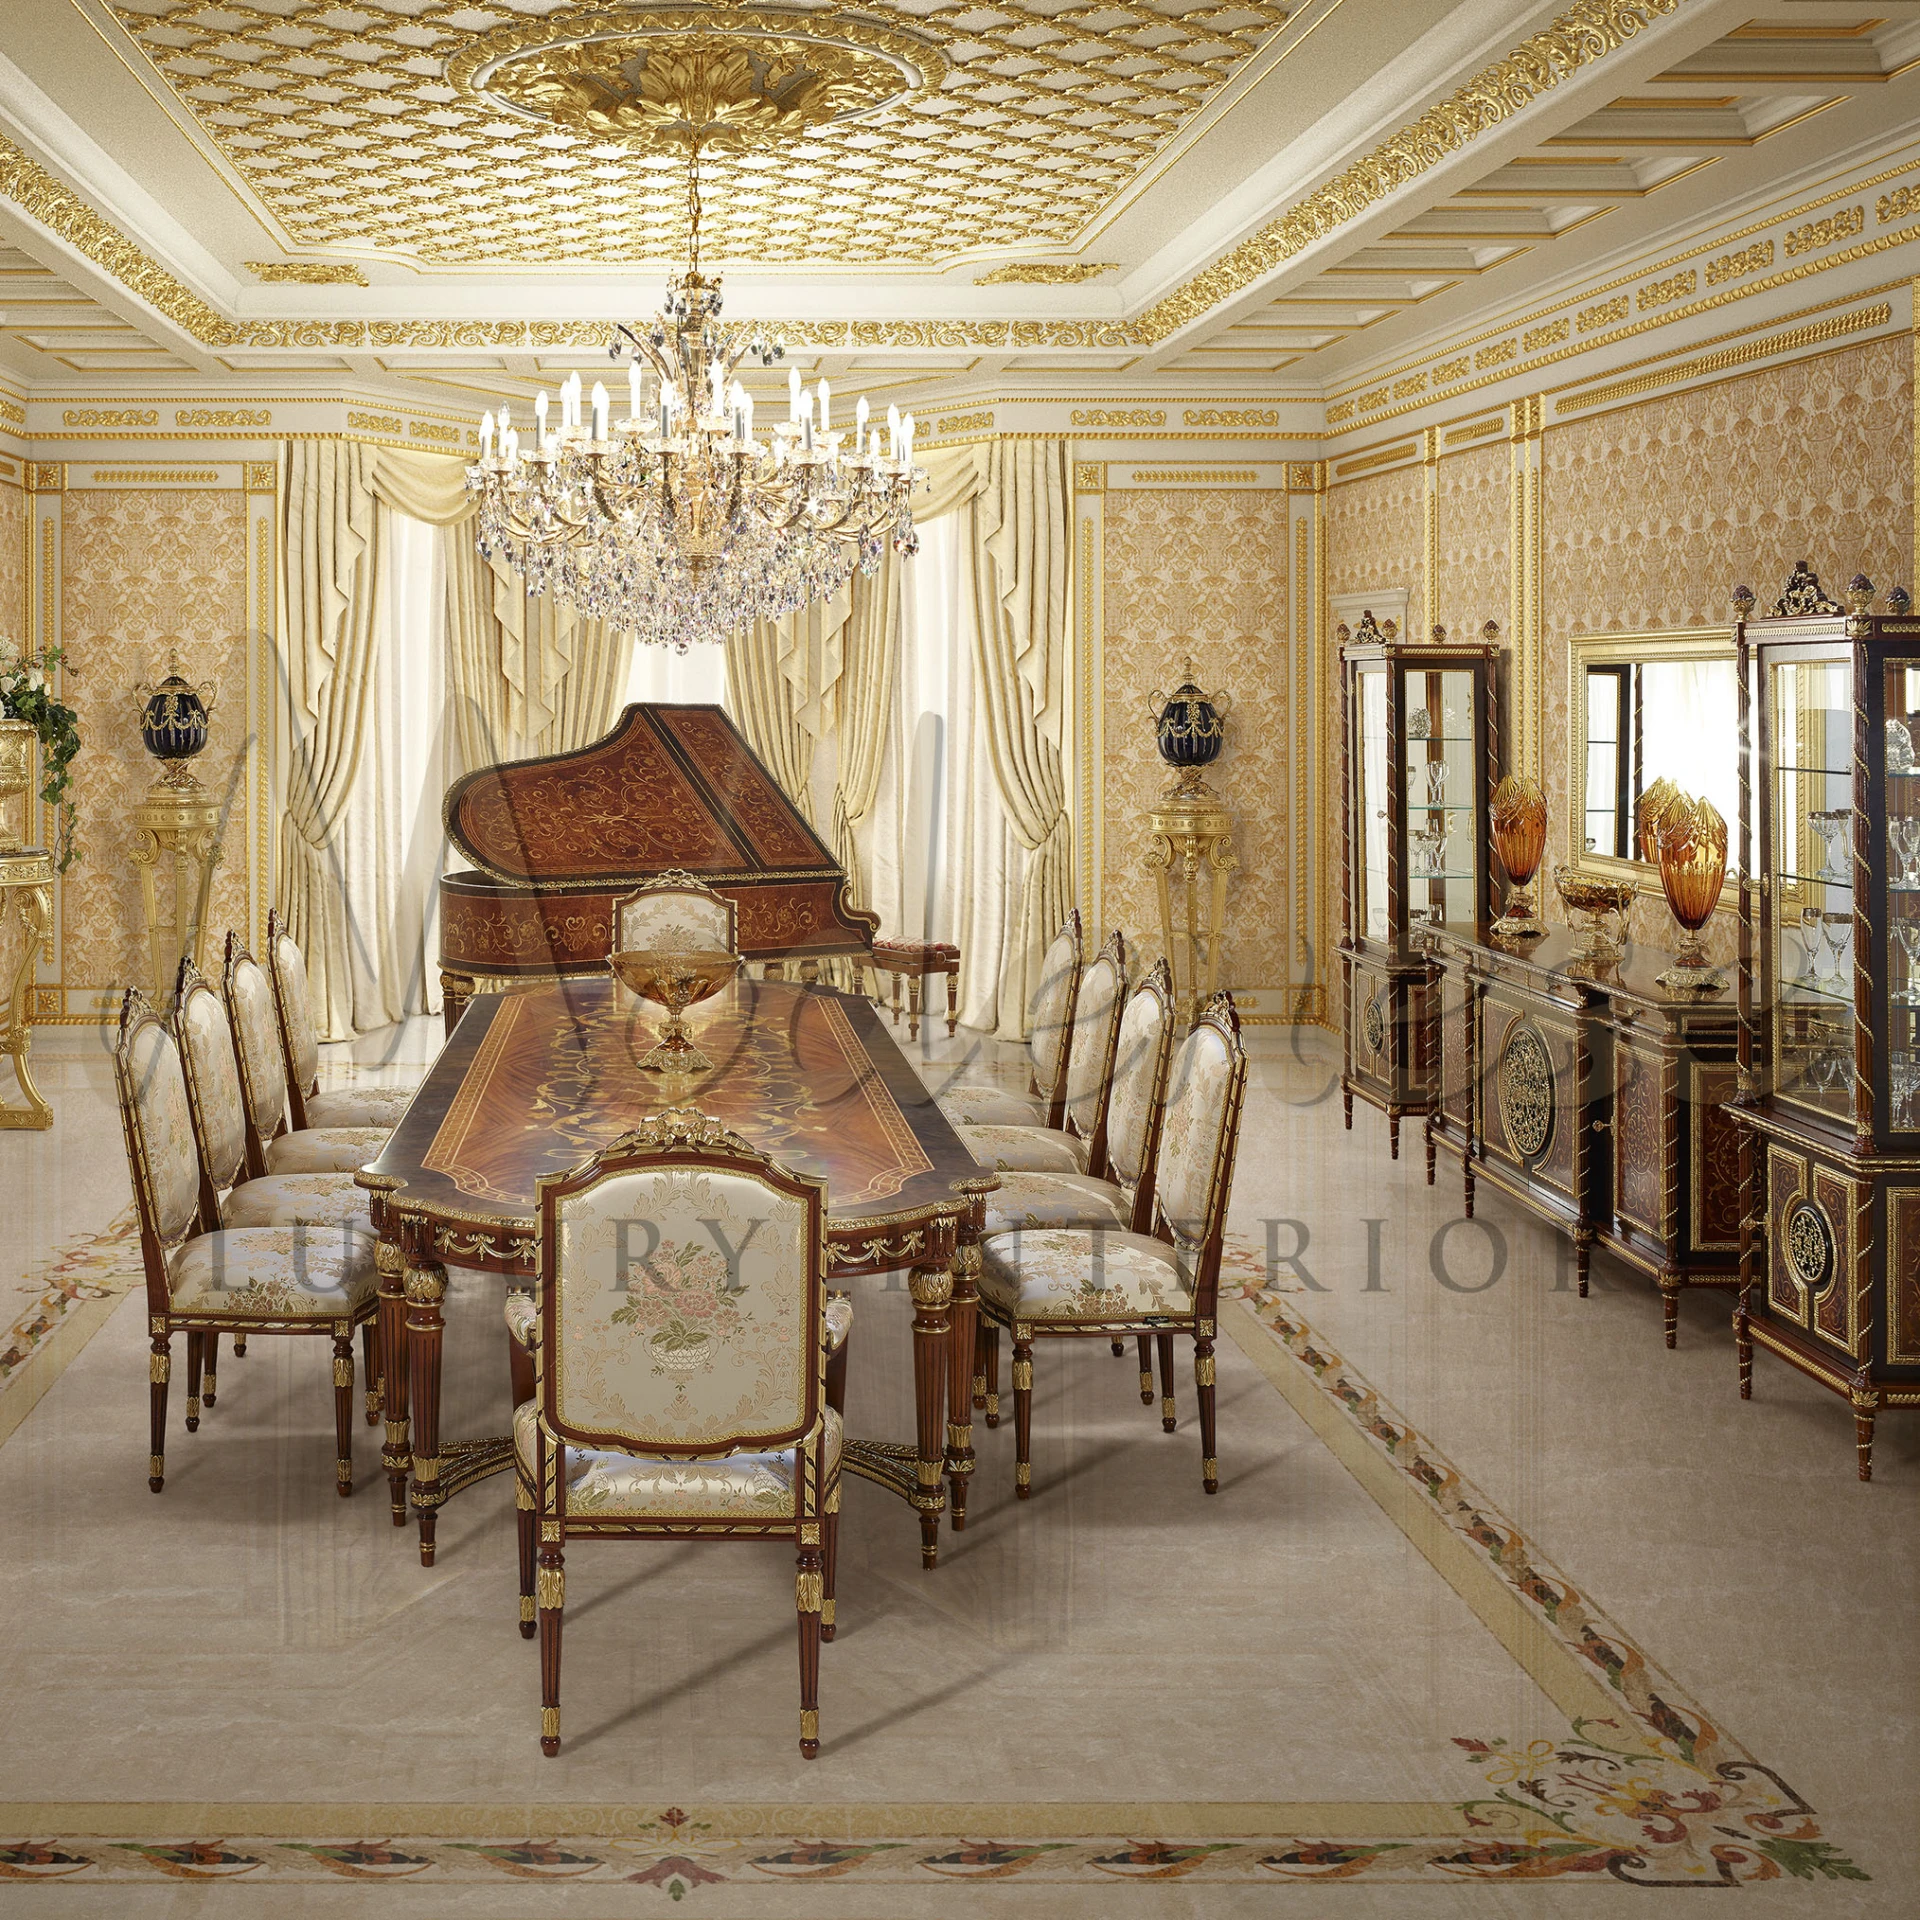 Infuse grandeur into your residence with our revisited empire-style vitrine, boasting gold leaf accents and exquisite baroque elements.